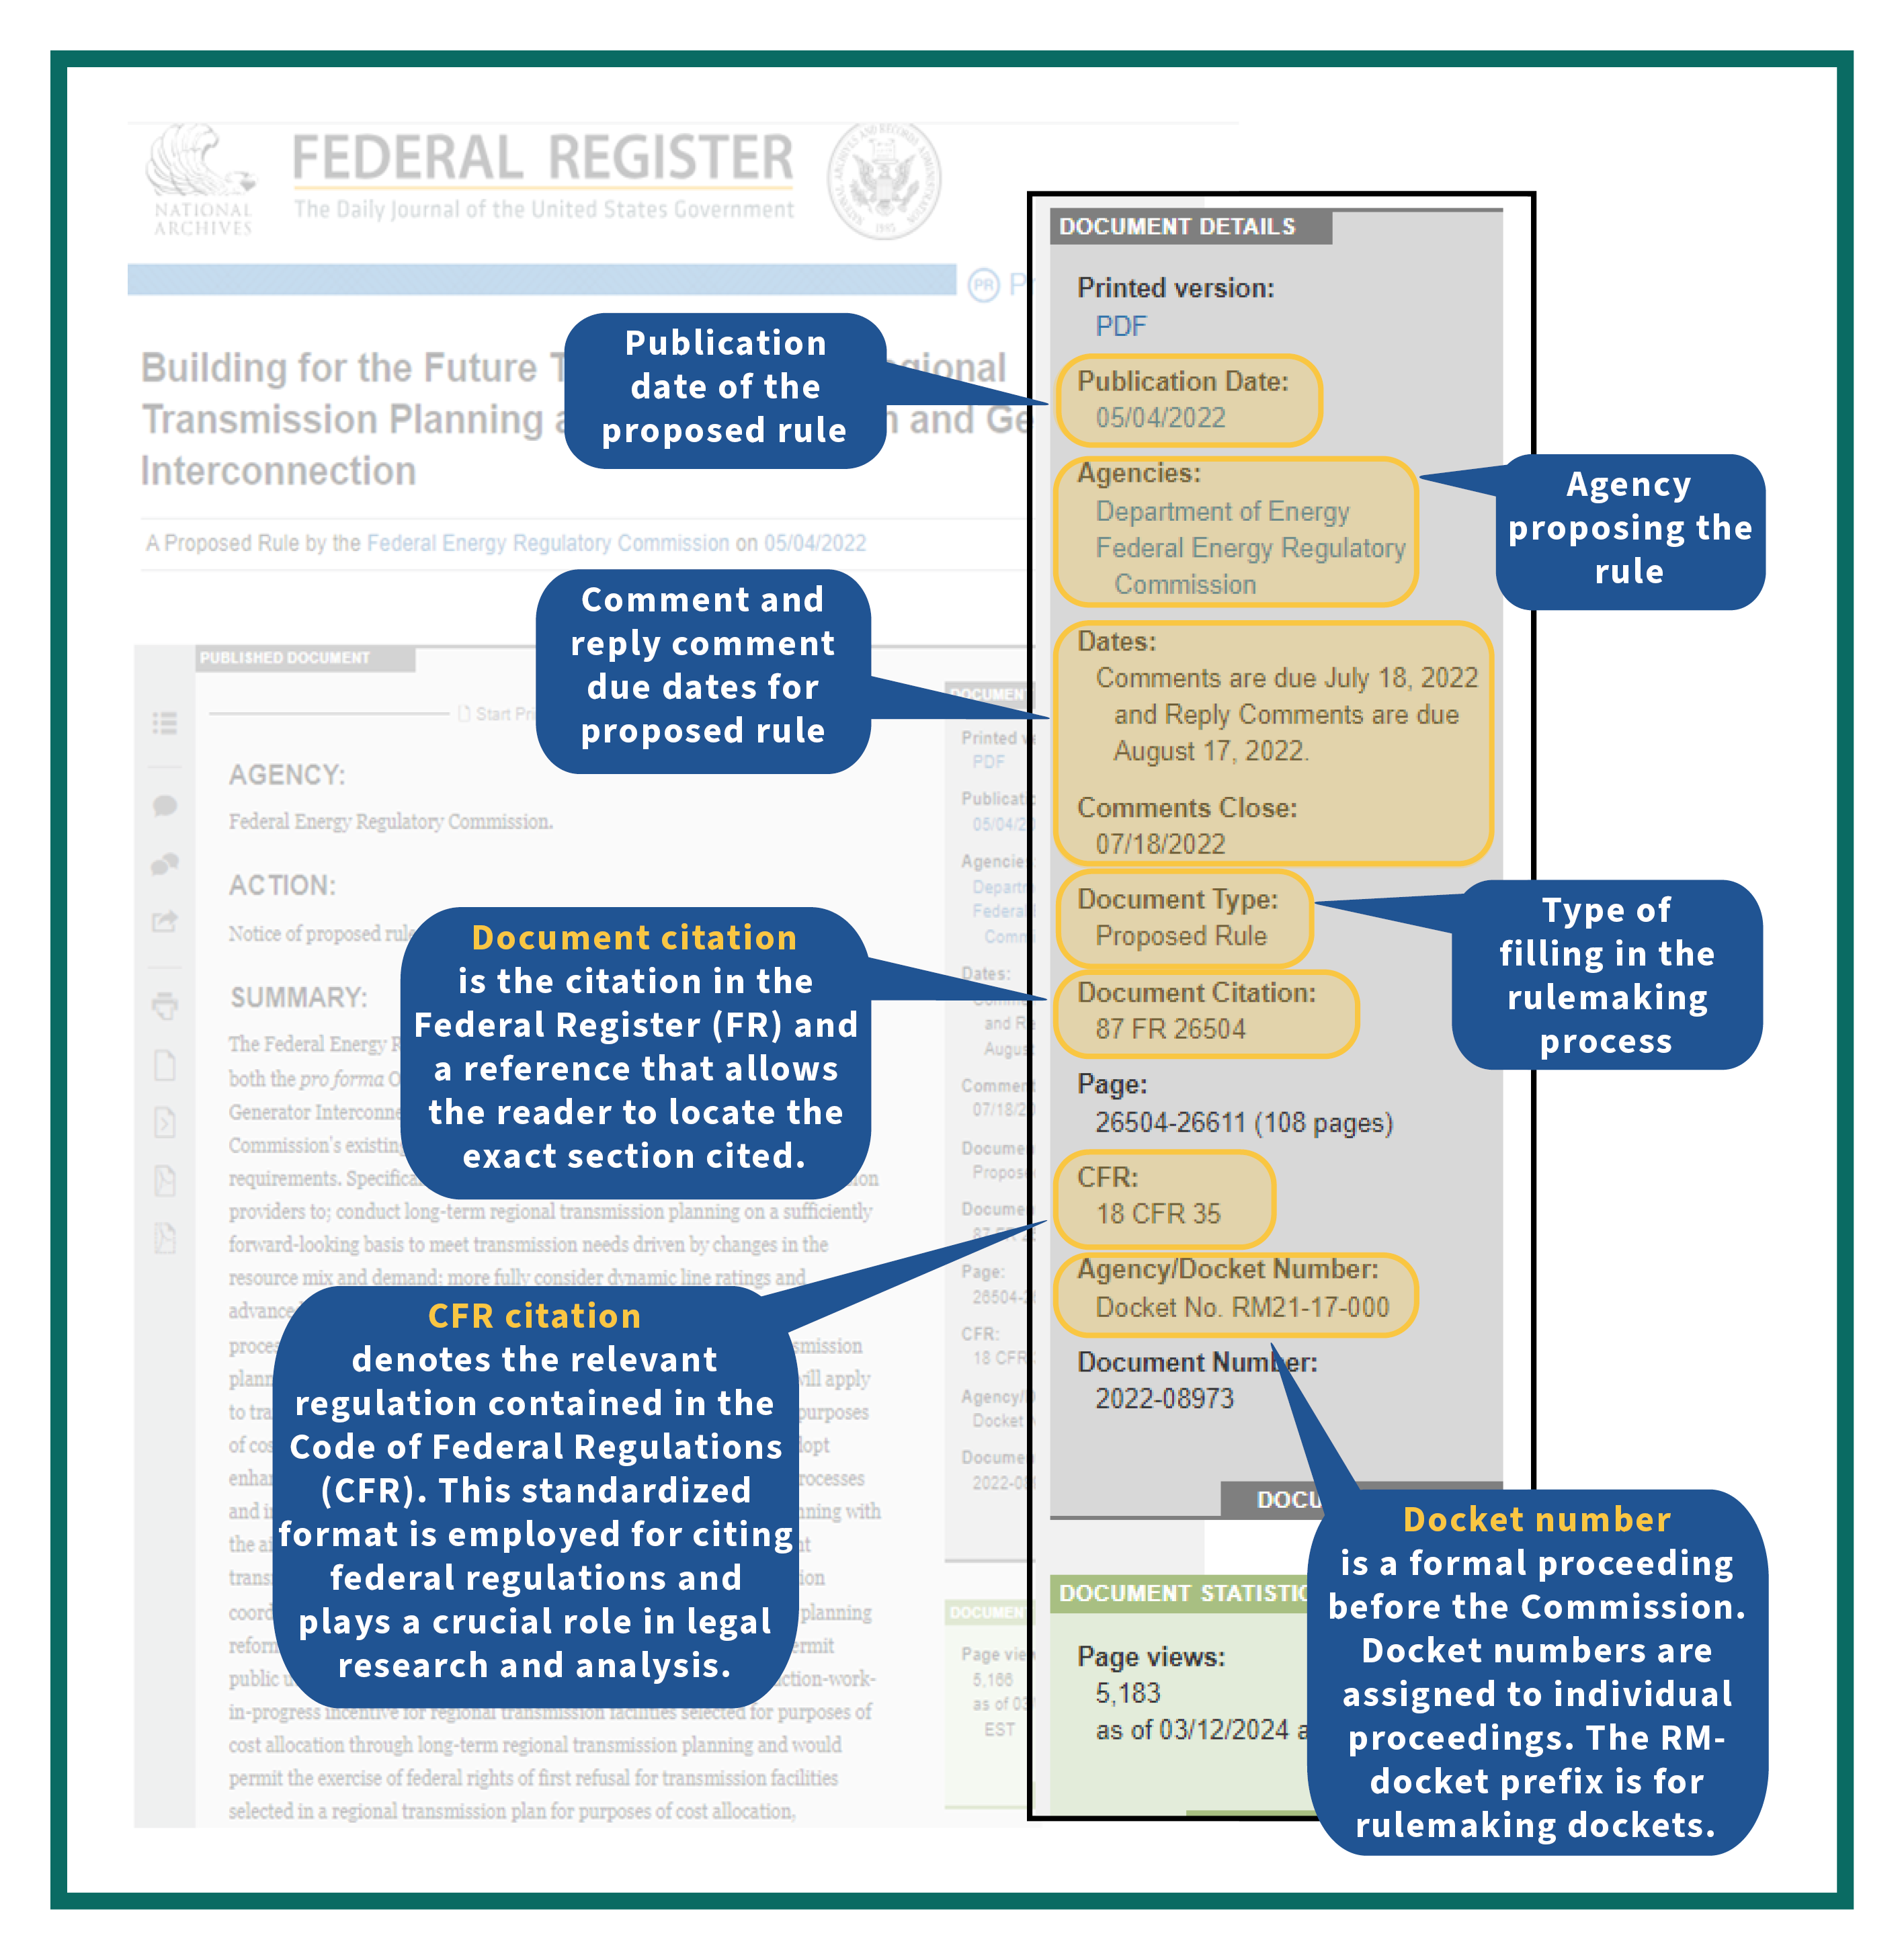 A screenshot of the Document Details section in an NOPR publication in the Federal Register. Seven key elements of the section are highlighted: 1. Publication date of the proposed rule; 2. Agency proposing the rule; 3. Comment and reply comment due dates for proposed rule; 4. Type of filing in the rulemaking process; 5. Document citation is the citation in the Federal Register (FR); 6. CFR citation denotes the relevant regulation contained in the Code of Federal Regulations (CFR); 7. Docket number